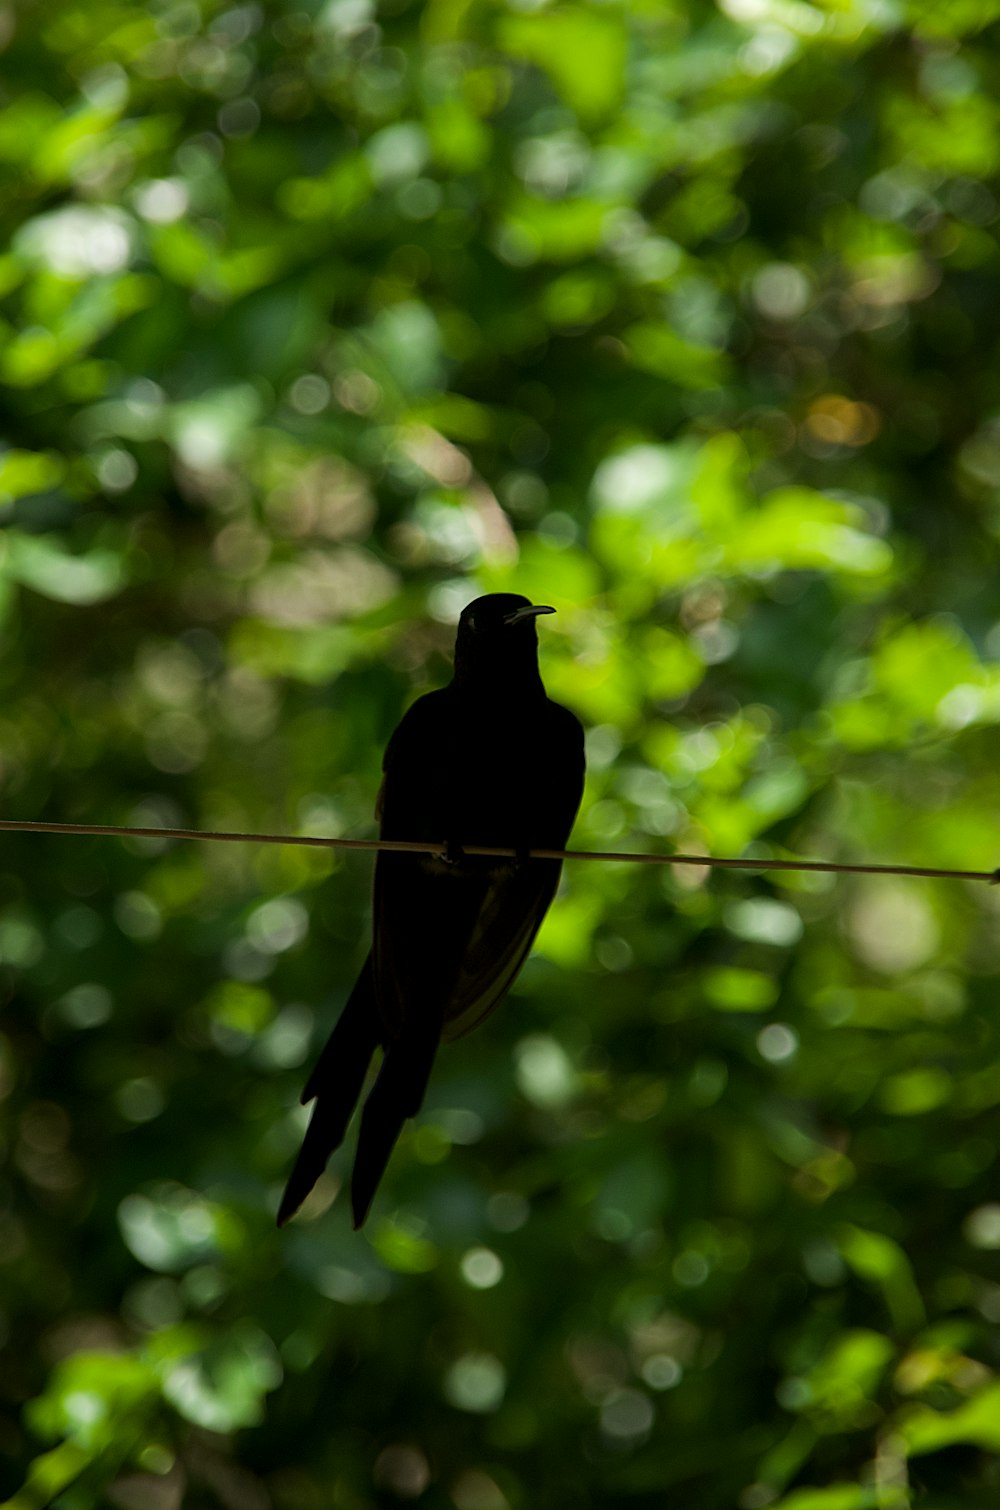 a black bird sitting on a wire in front of trees